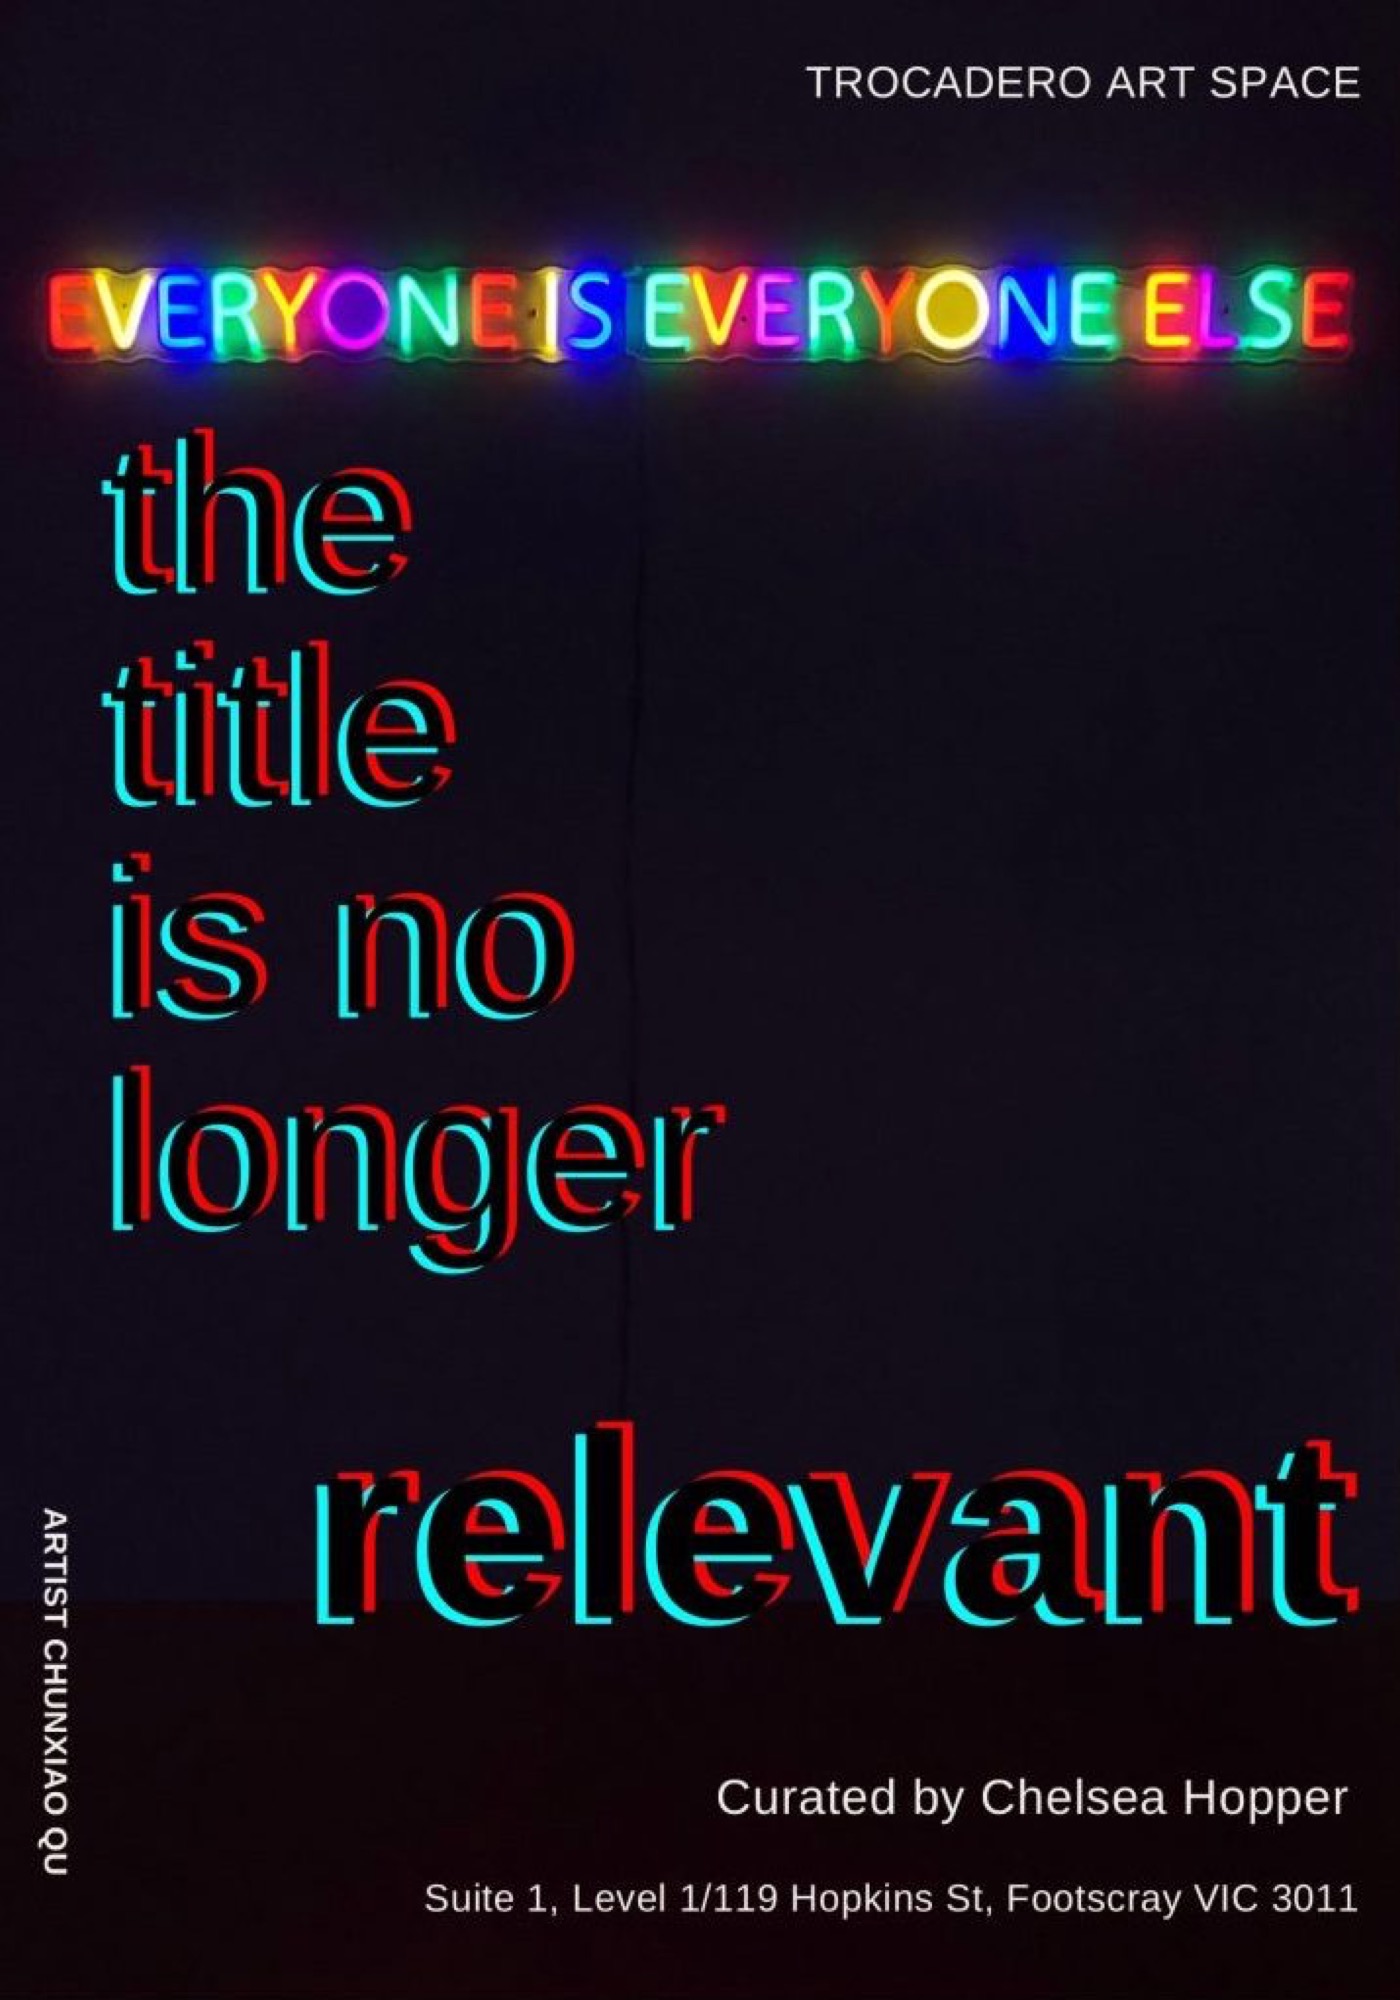 Promotional invite for <em>the title is no longer relevant</em>. Designed by Chunxiao Qu. Courtesy of the artist.